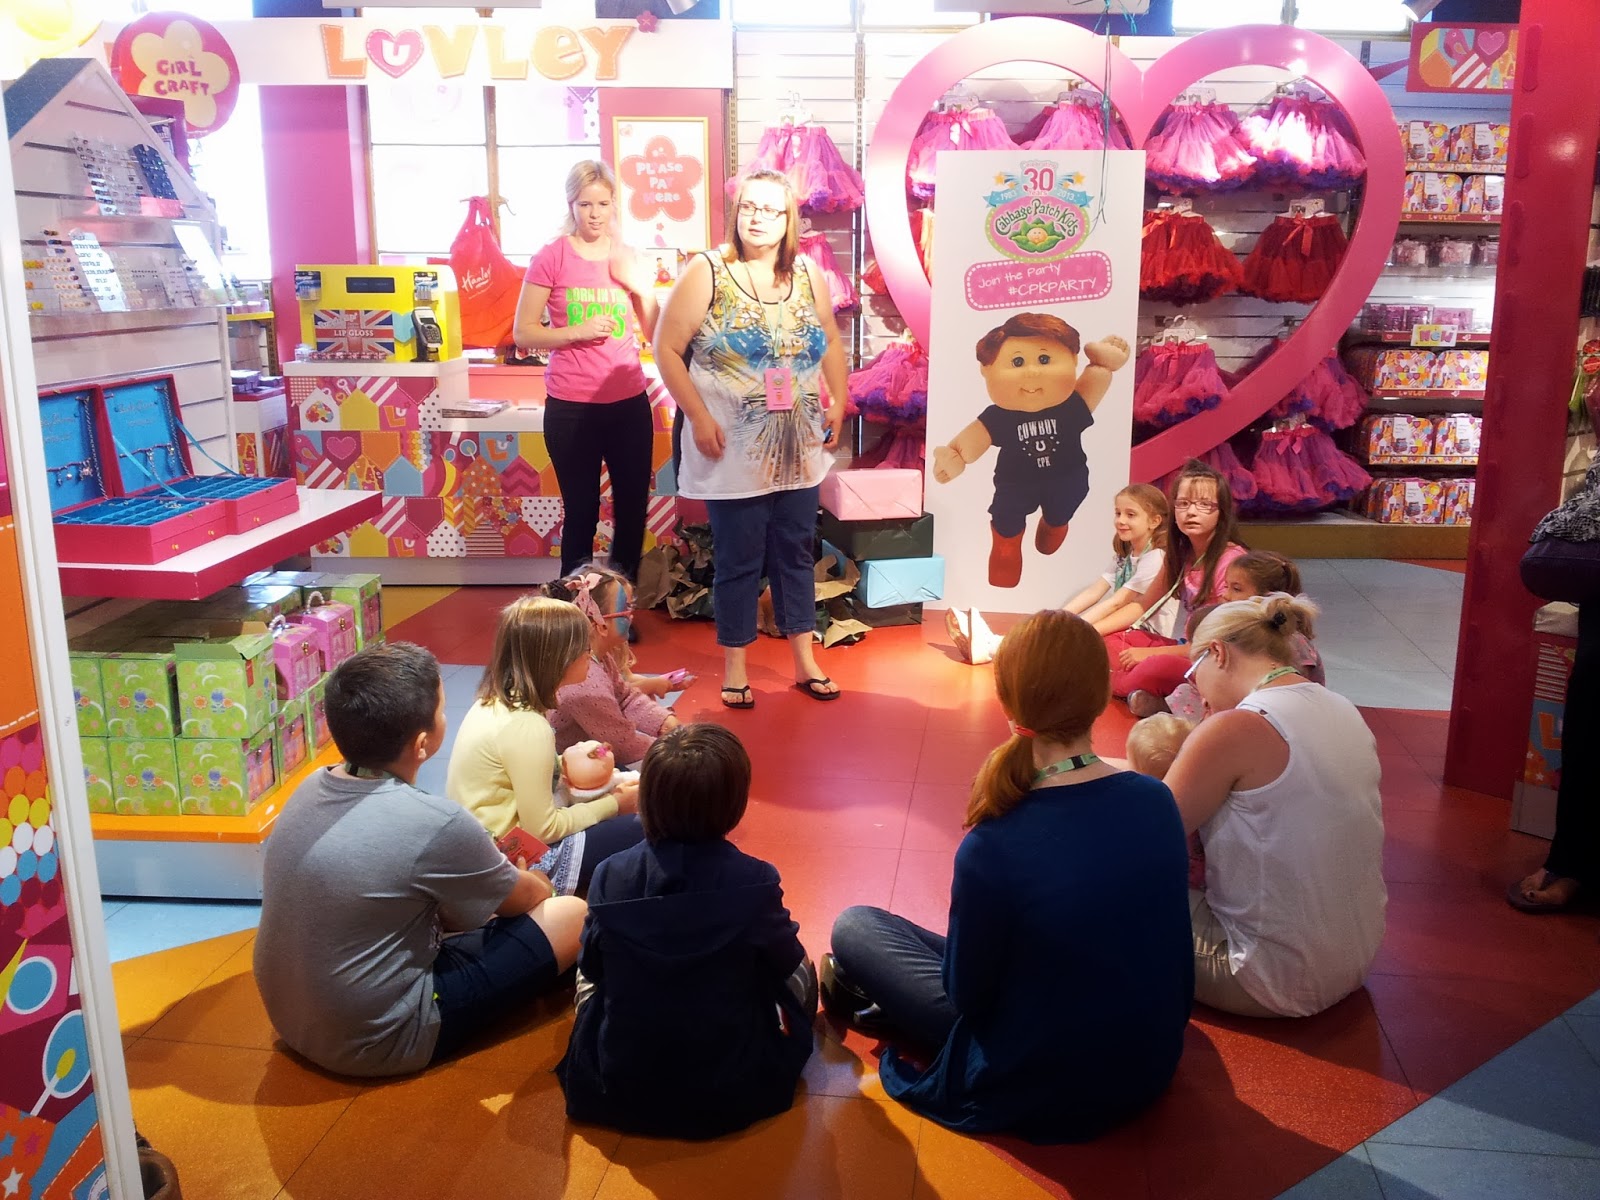 , Cabbage Patch Kids 30th Birthday Party #CPKParty